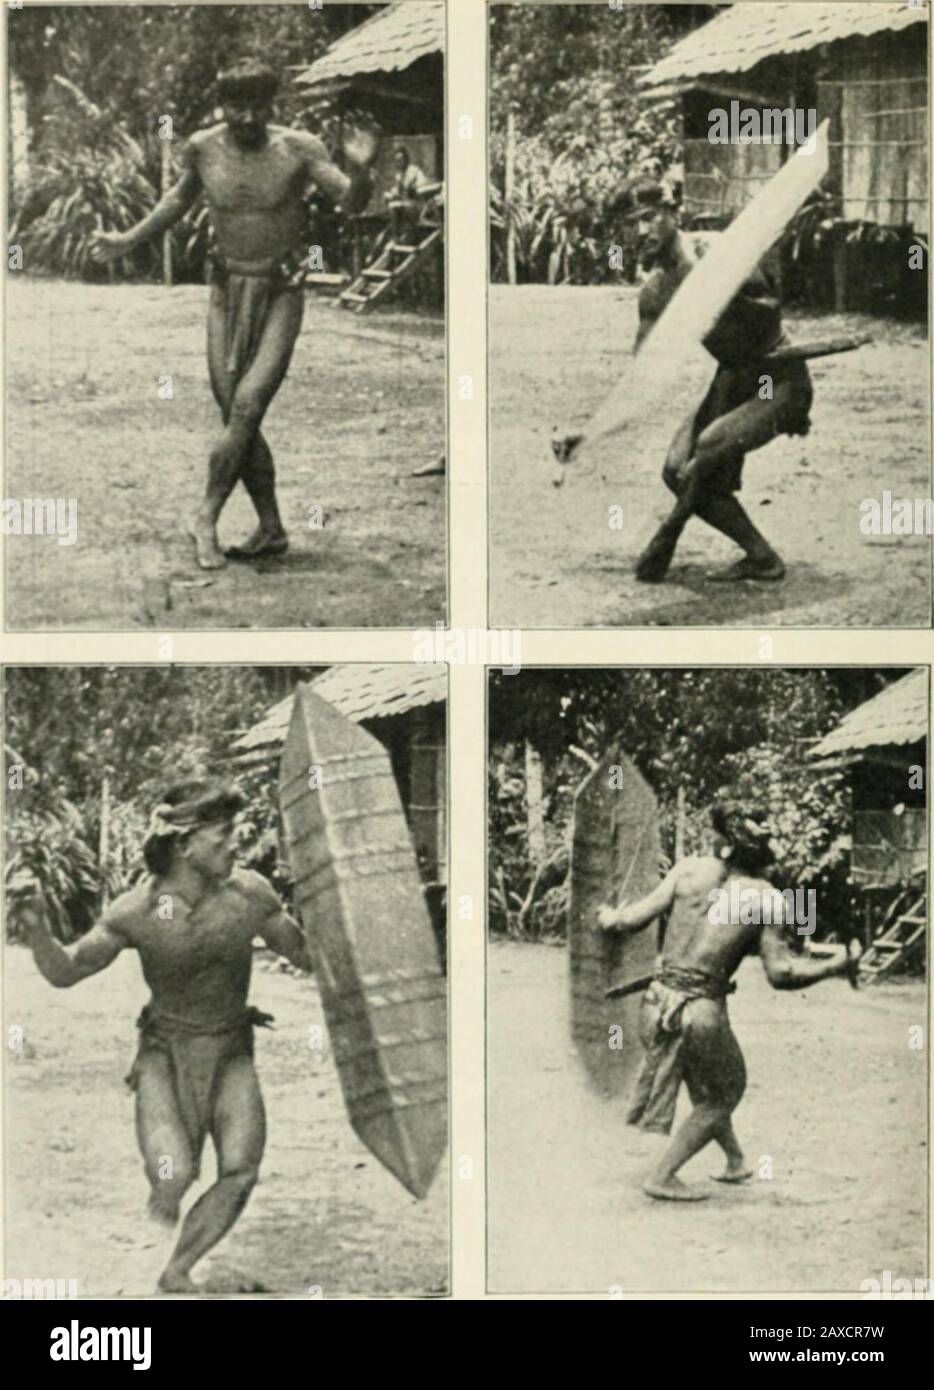 Through Central Borneo; an account of two years' travel in the land of the head-hunters between the years 1913 and 1917 . THE PENYAIinOSO WAR DANCE. TAMAIXJE Thu (lancr id pracliMtl liy many Payak lril»c» Fr({ra|&gt;h film THE PENYAHBONGS 183 Dayak tribes also possess such feminine accessories.With the Penyahbongs the male chiefly hunts, the femaledoing all the work. She makes the house, cuts the sagopalm, and prepares the sago. When setting forth to bringhome the animal killed by her husband she carries herown parang with which to cut it up, placing it inside therattan bag on her back. With o Stock Photo